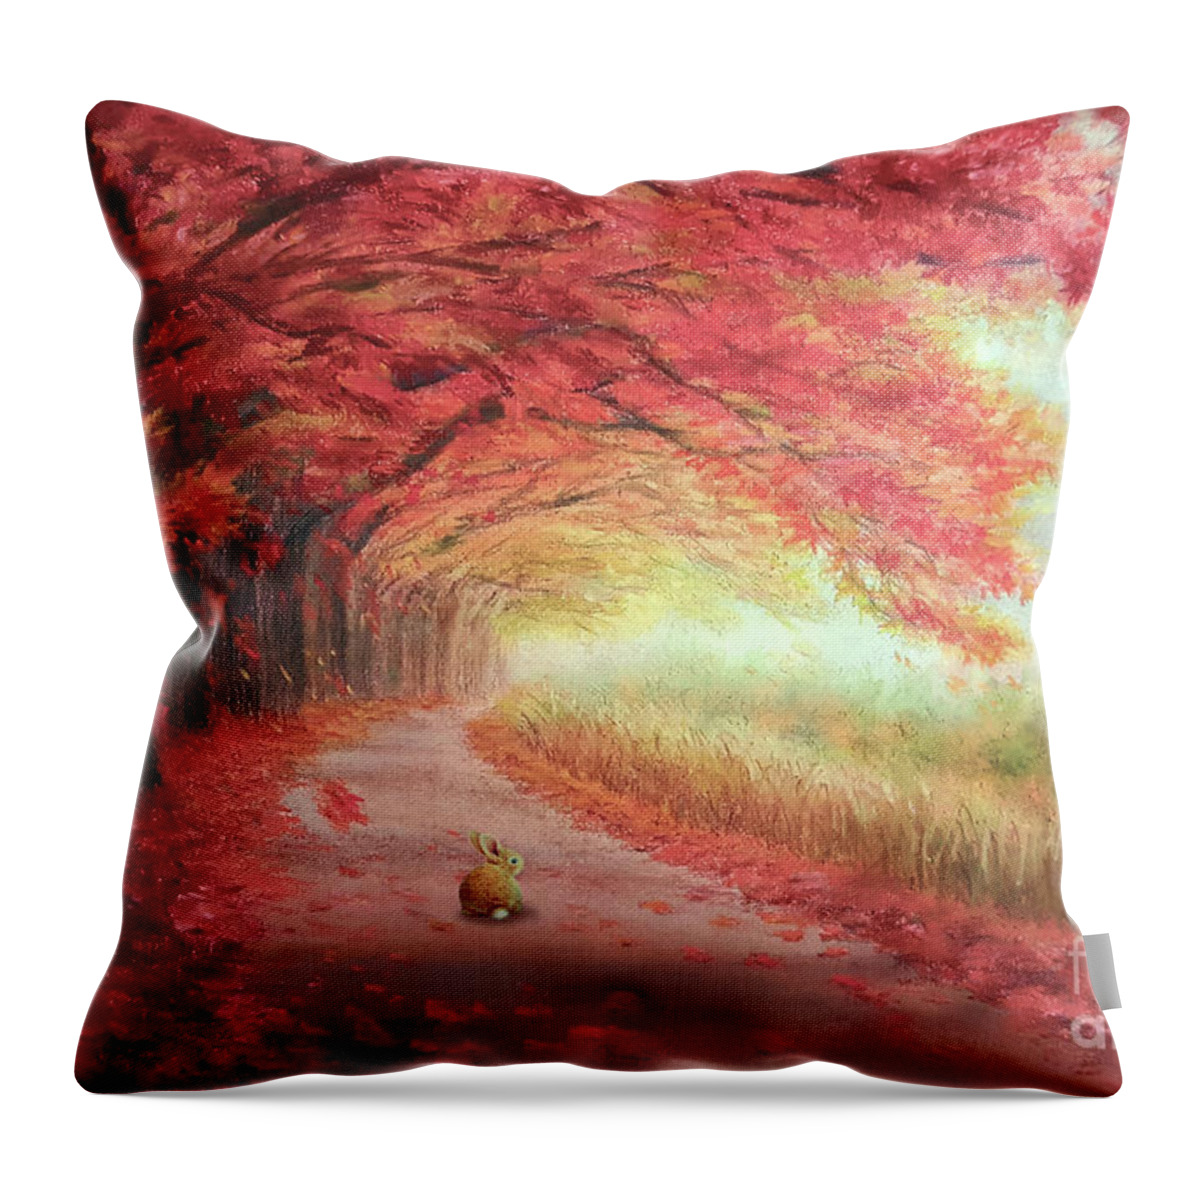 Autumn Throw Pillow featuring the painting Autumn Journey by Yoonhee Ko